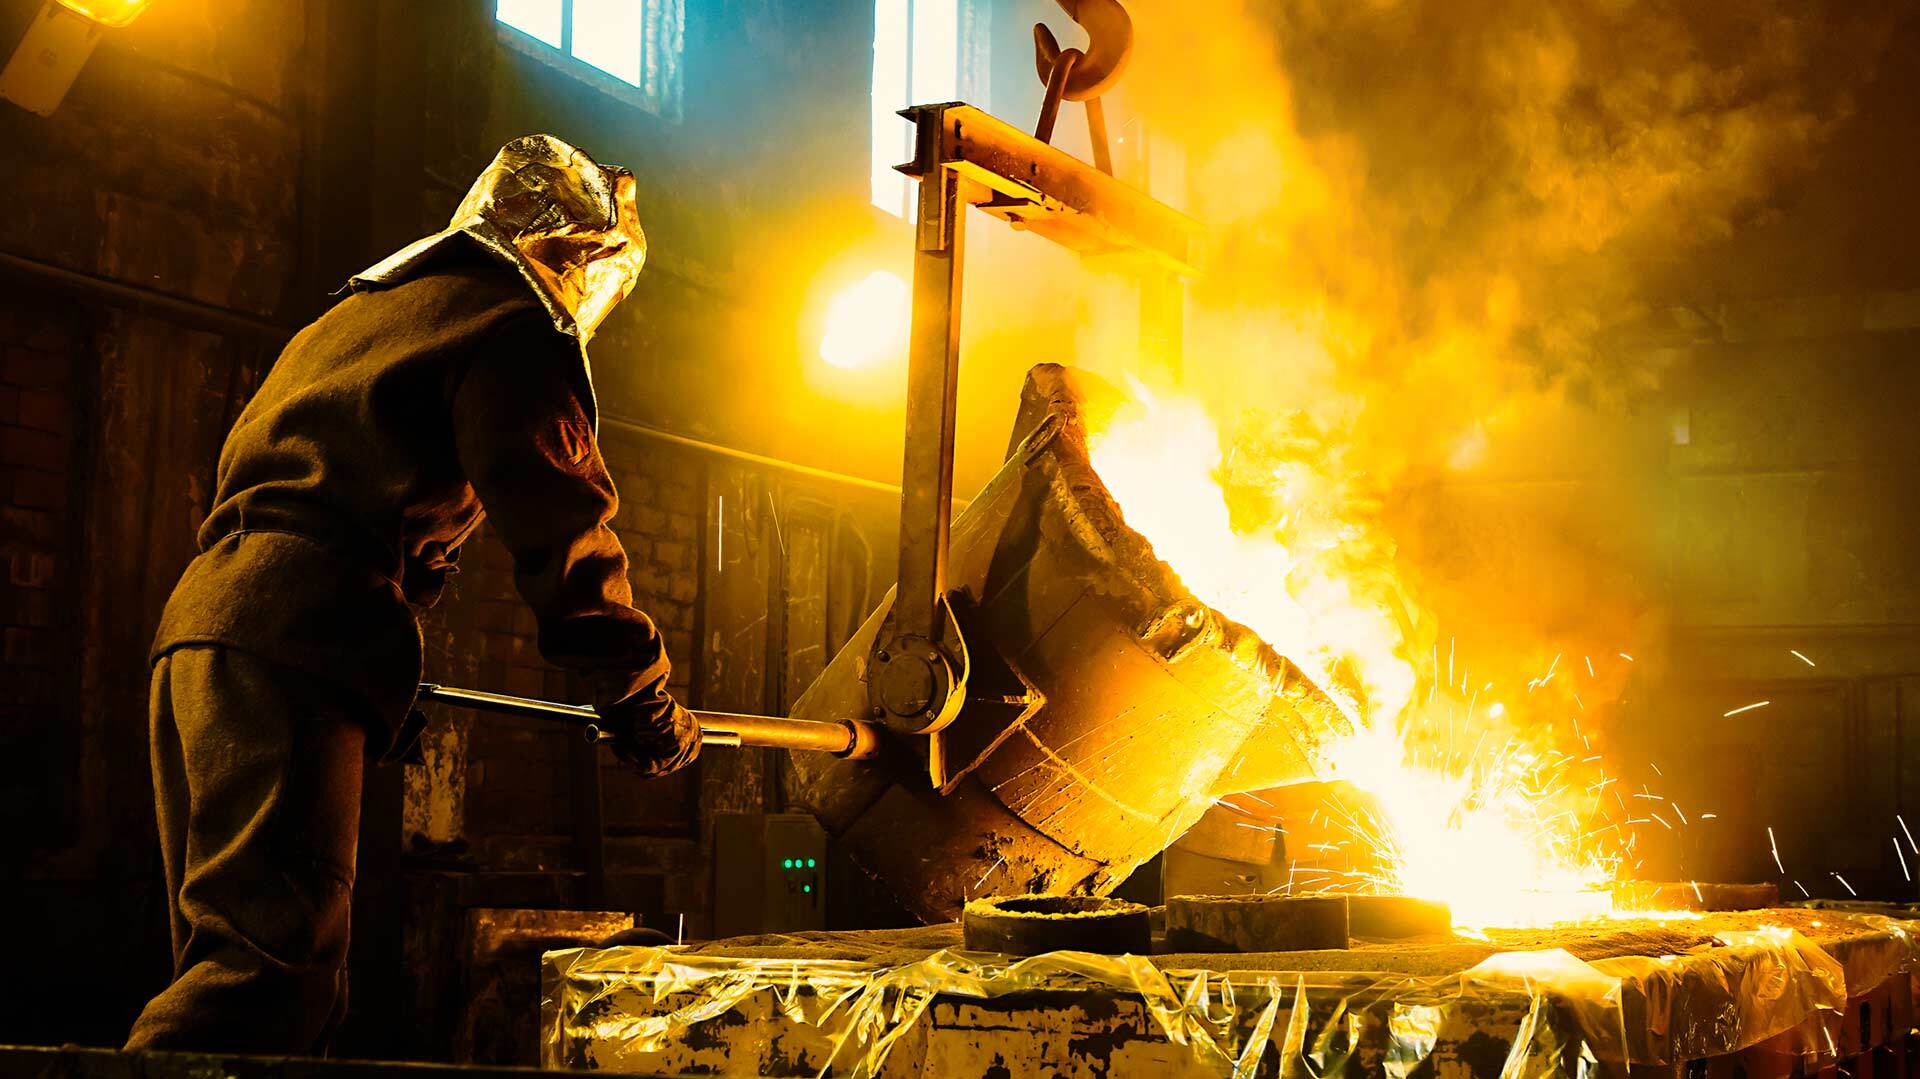 Steel manufacturing contributes to air, water and soil pollution. UT faculty members are joining colleagues at research universities in Arizona and New Mexico and a national laboratory to discover ways to reduce steel production emissions. Credit: iStock